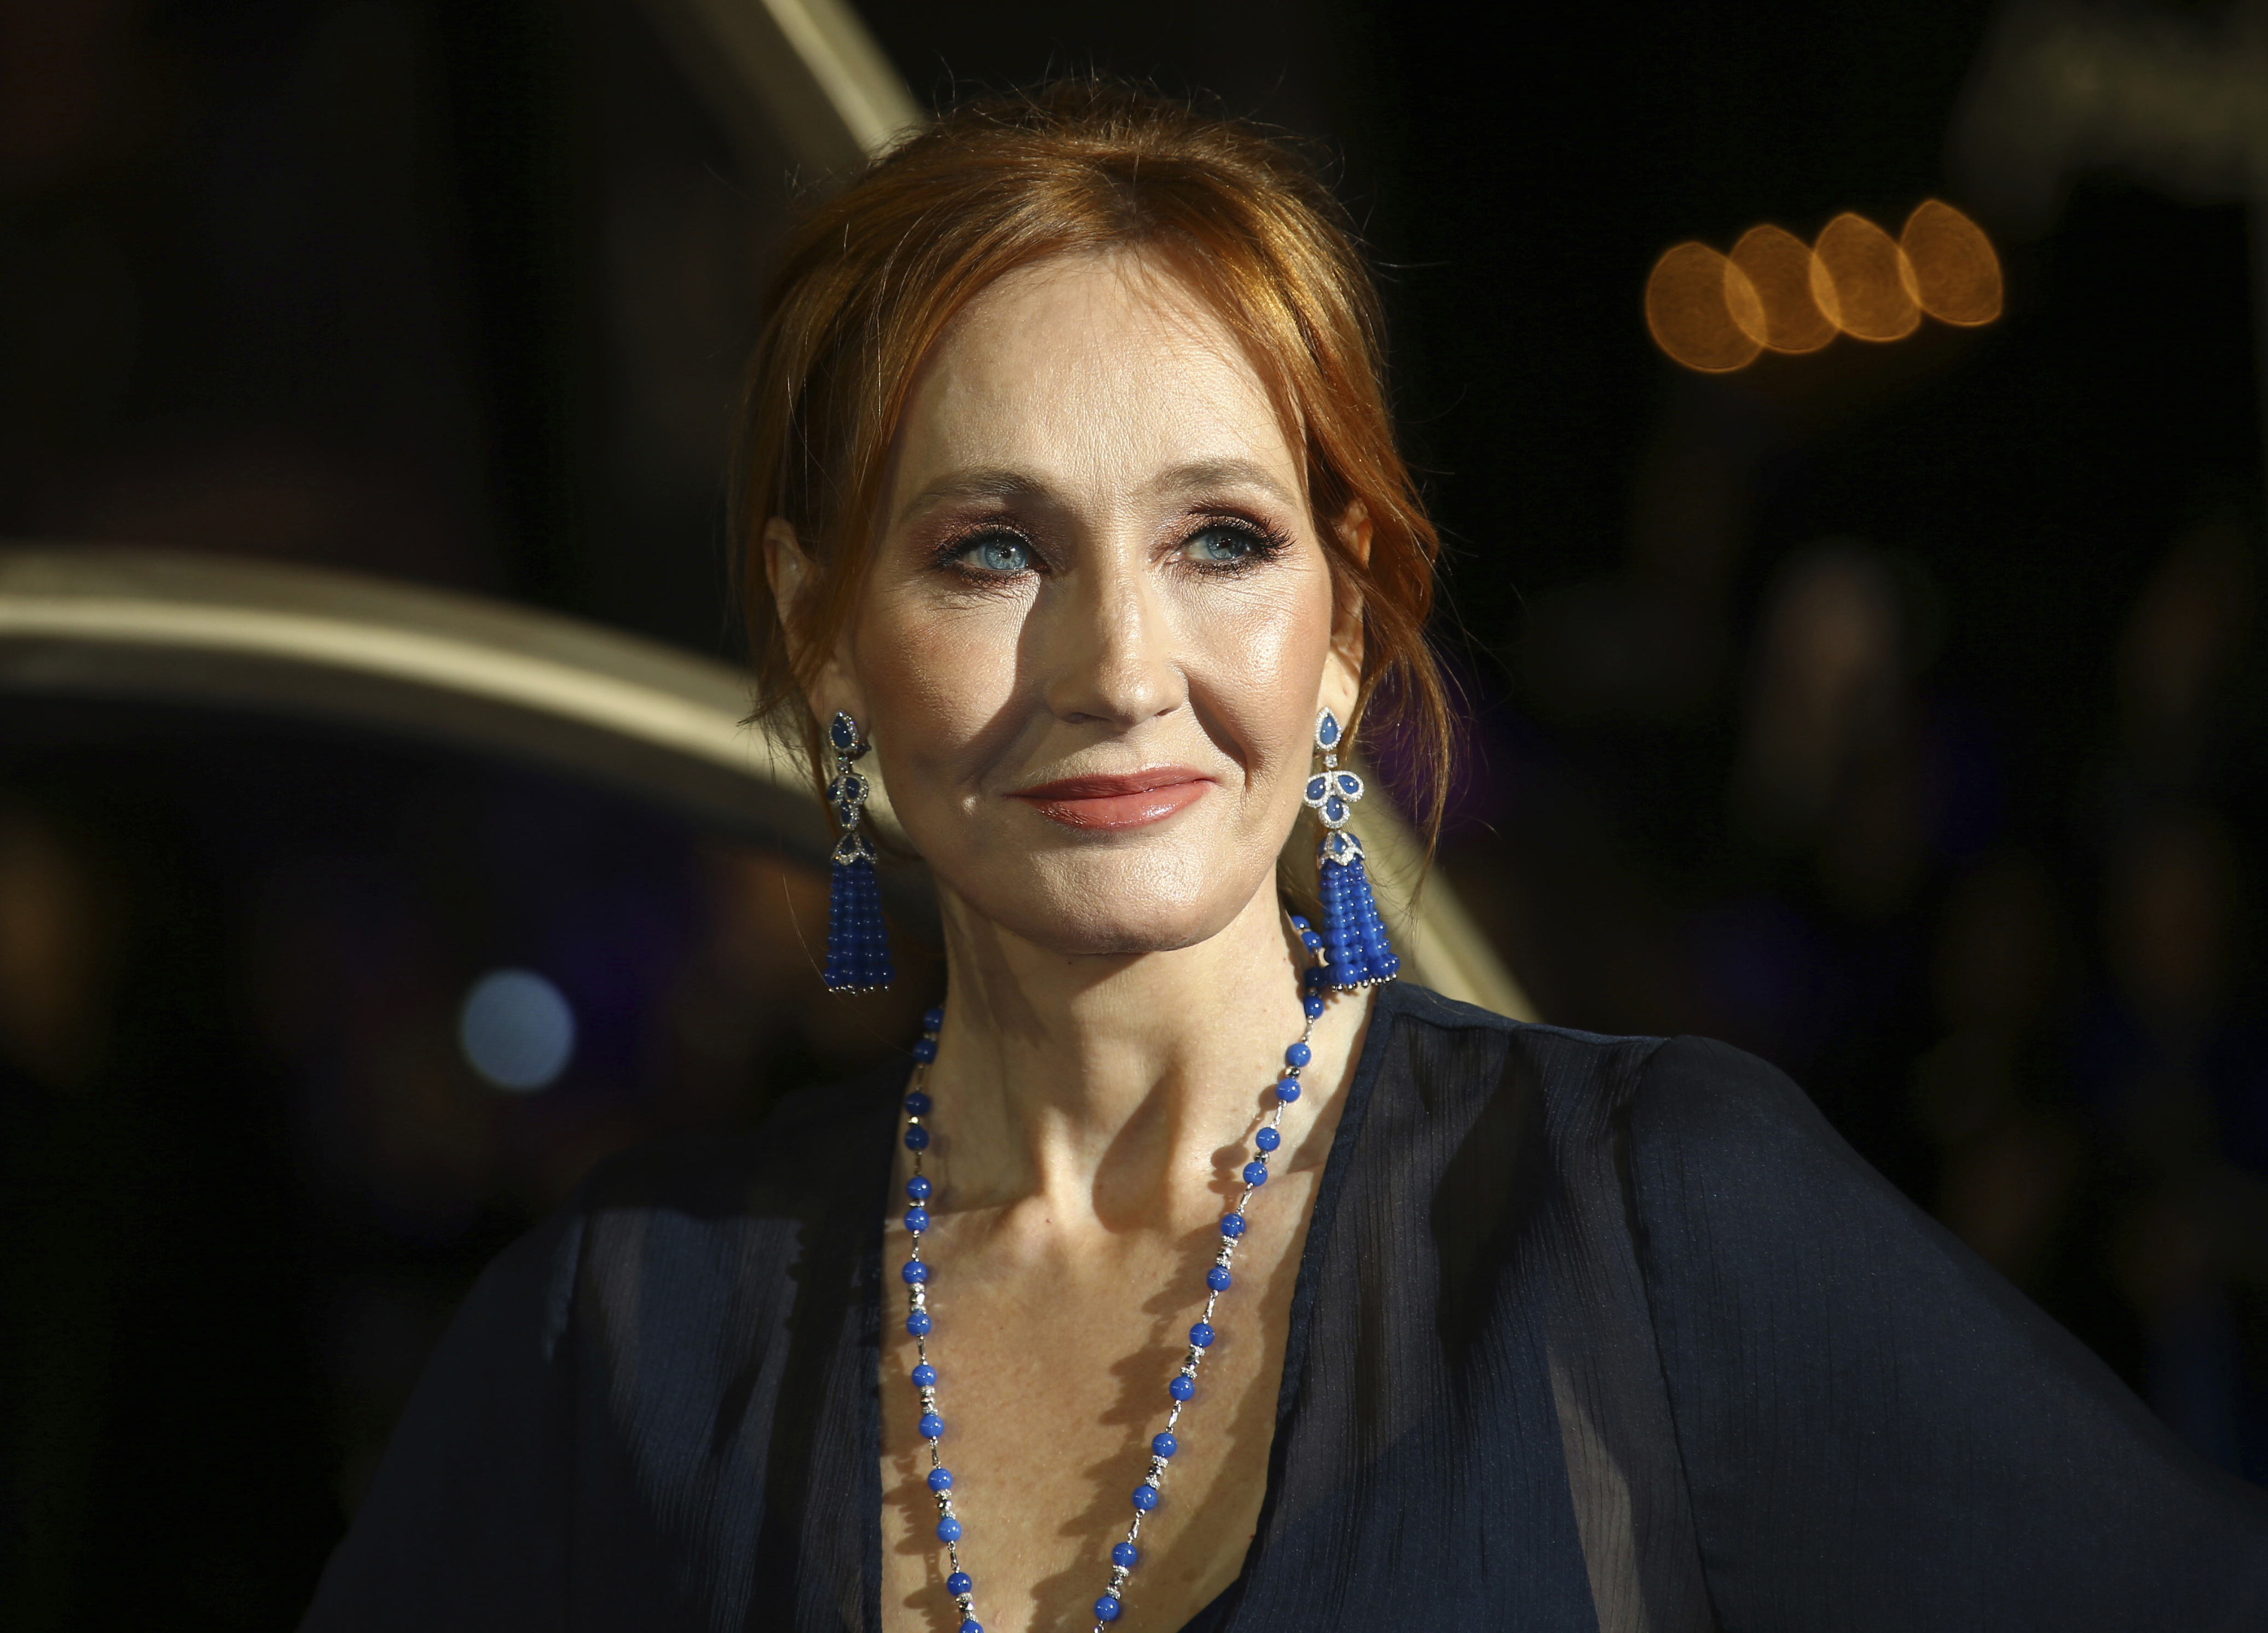 JK Rowling committed no crime with tweets, police say